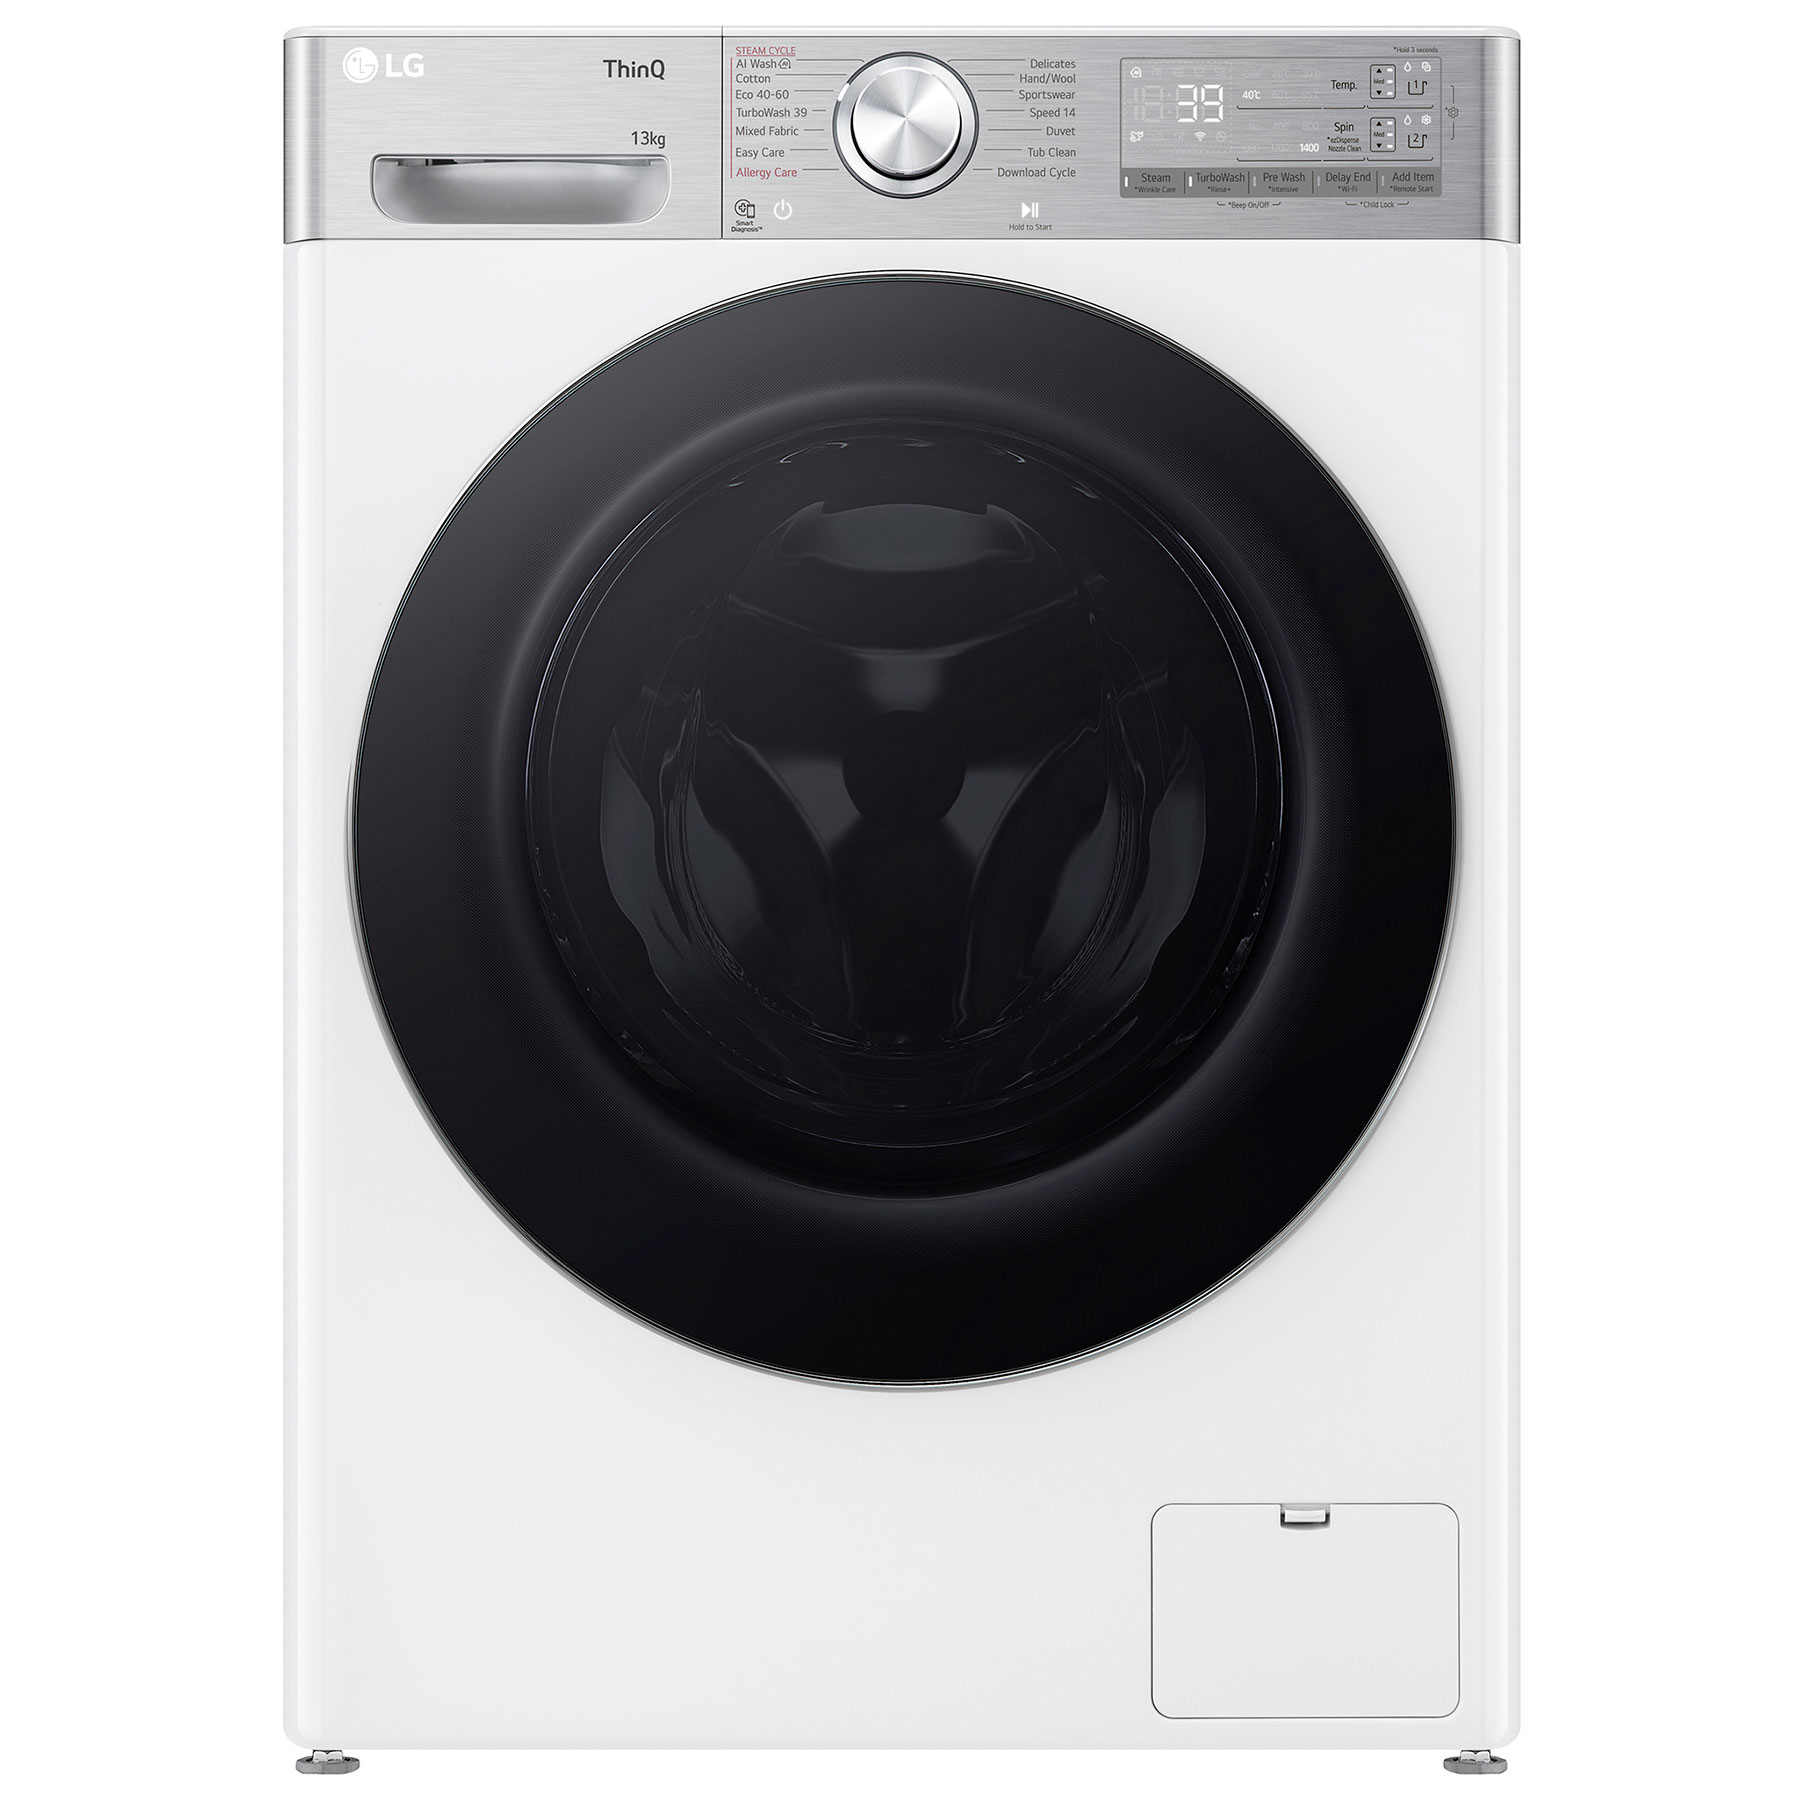 LG F4Y913WCTA1 Washing Machine in White 1400rpm 13kg A Rated Wi Fi